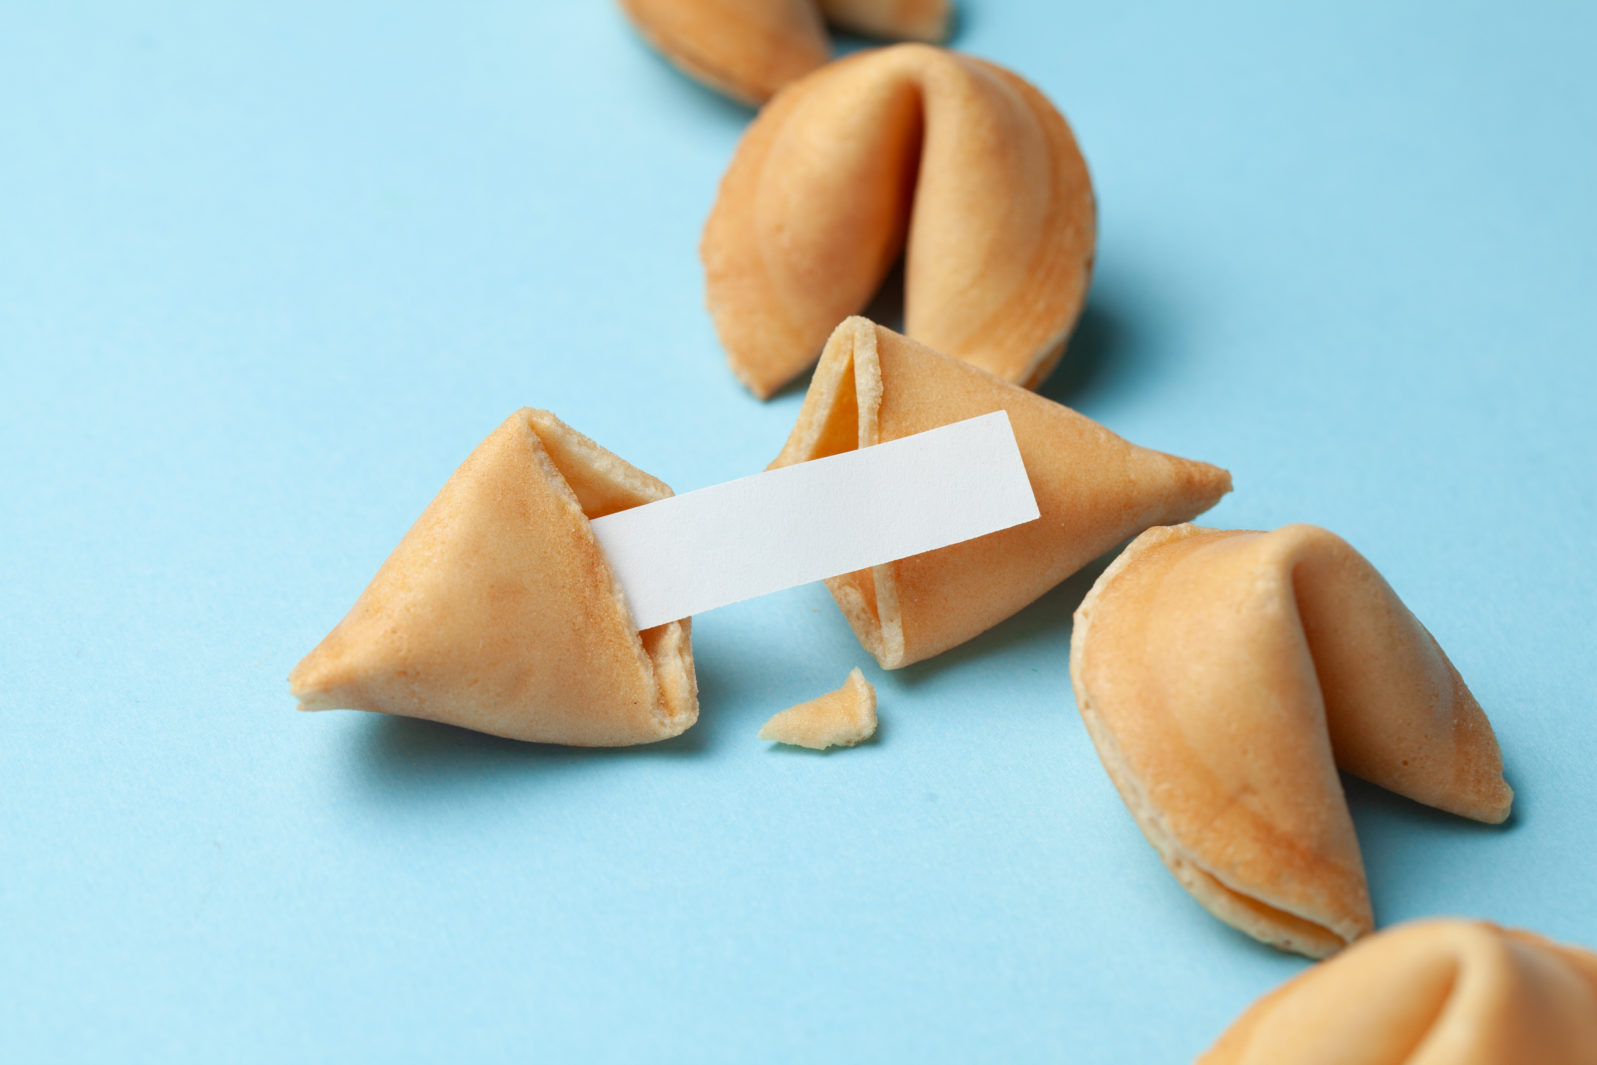 Chinese fortune cookies. Cookies with empty blank inside for prediction words. Blue background.